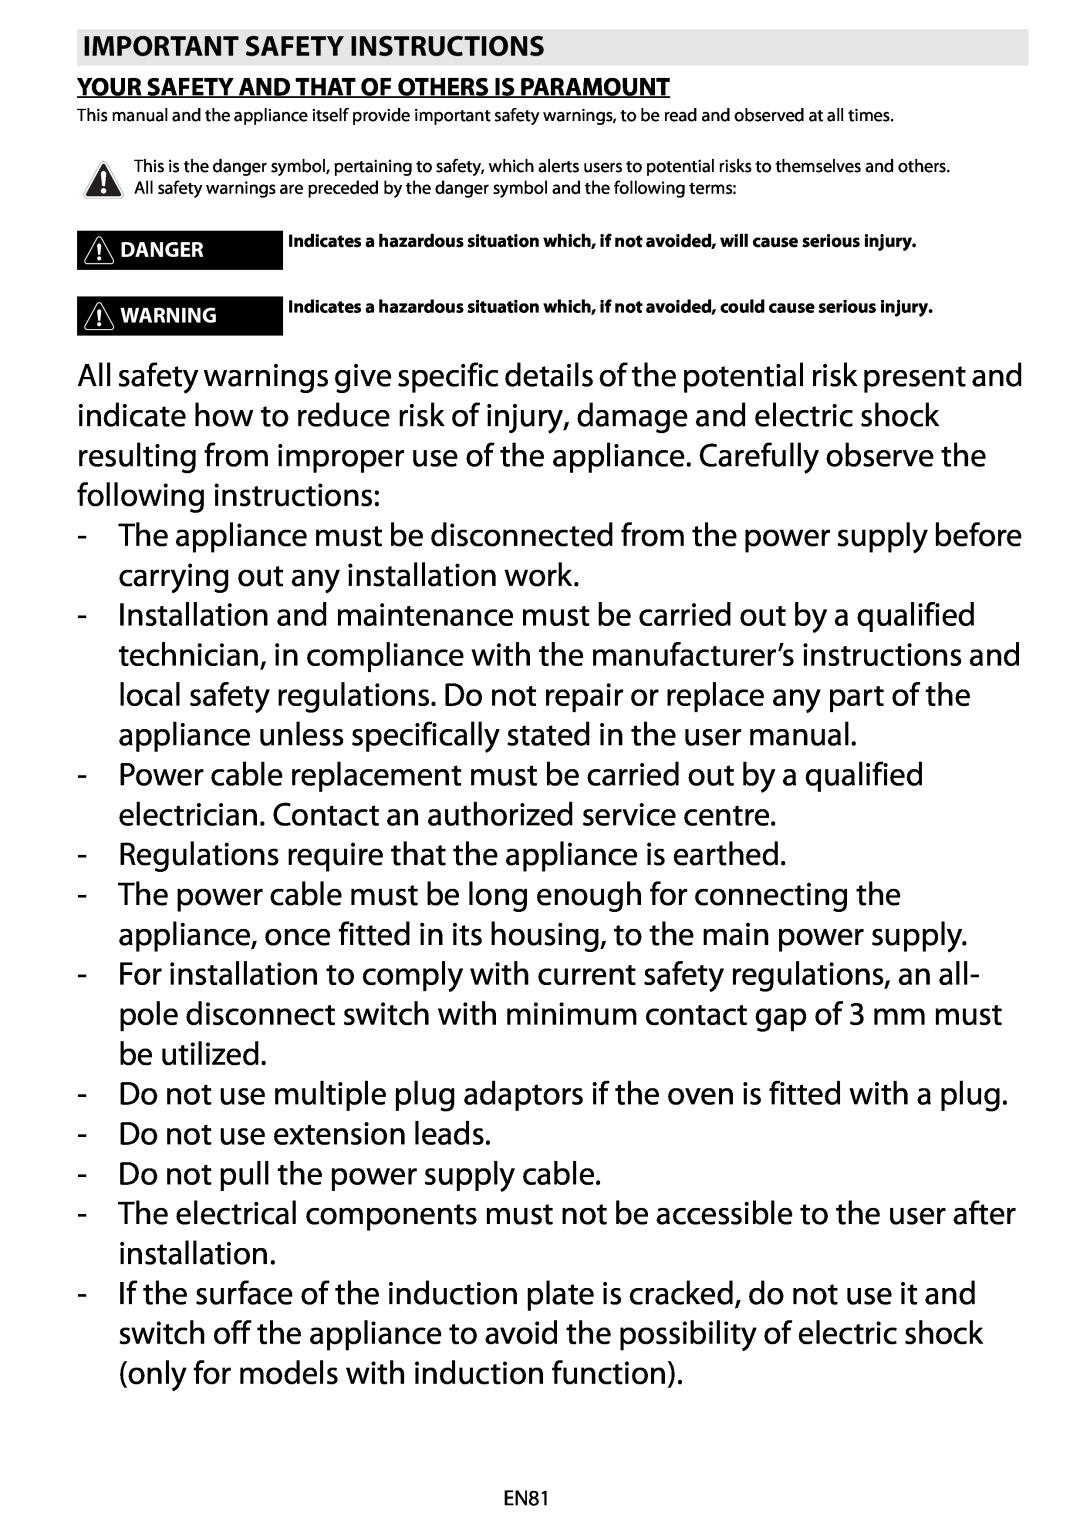 Whirlpool AKZM 663 manual Regulations require that the appliance is earthed 